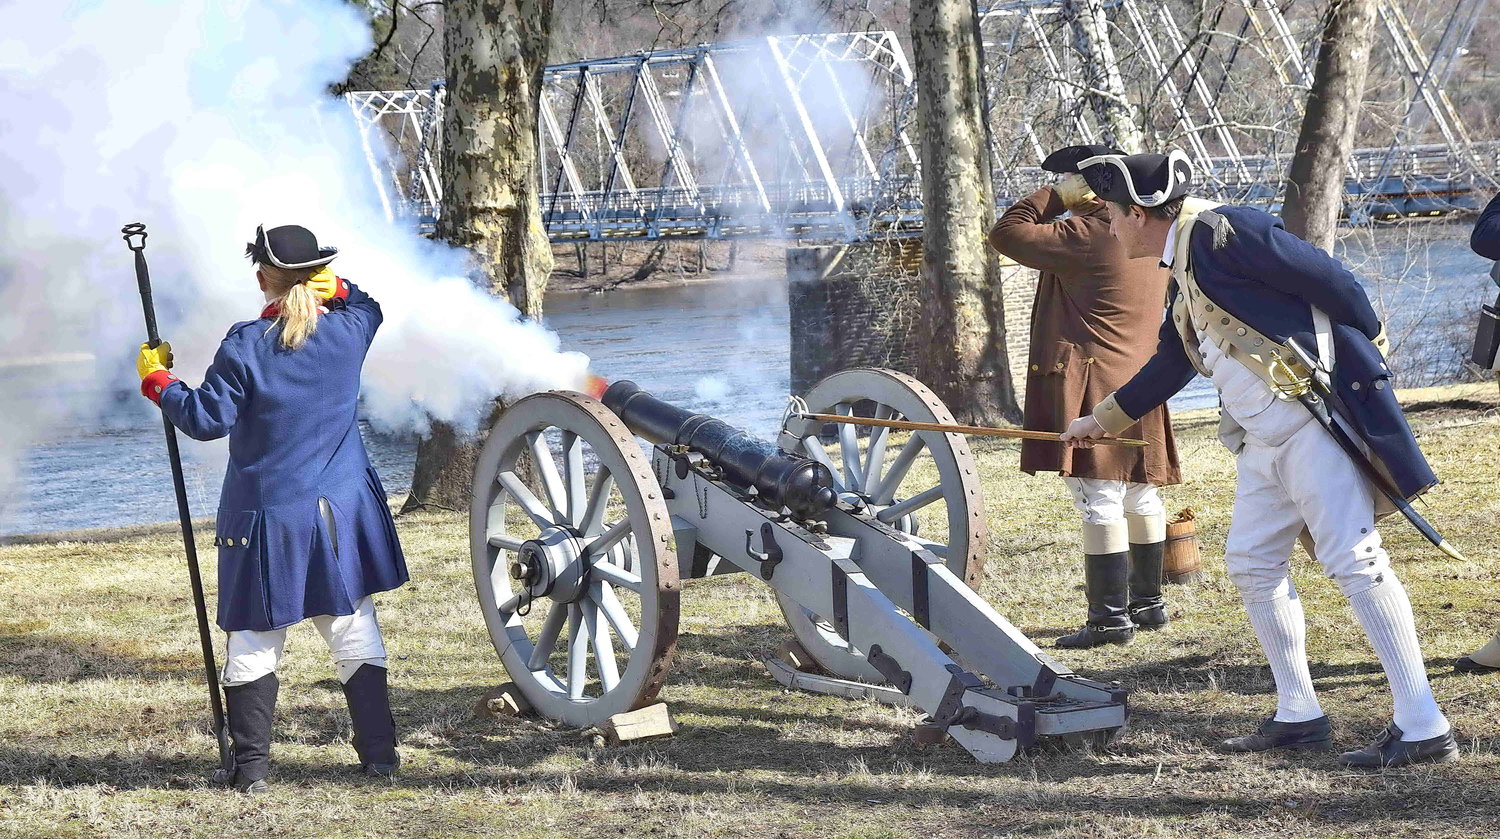 Reenactors portraying Revolutionary War soldiers fire a canon.